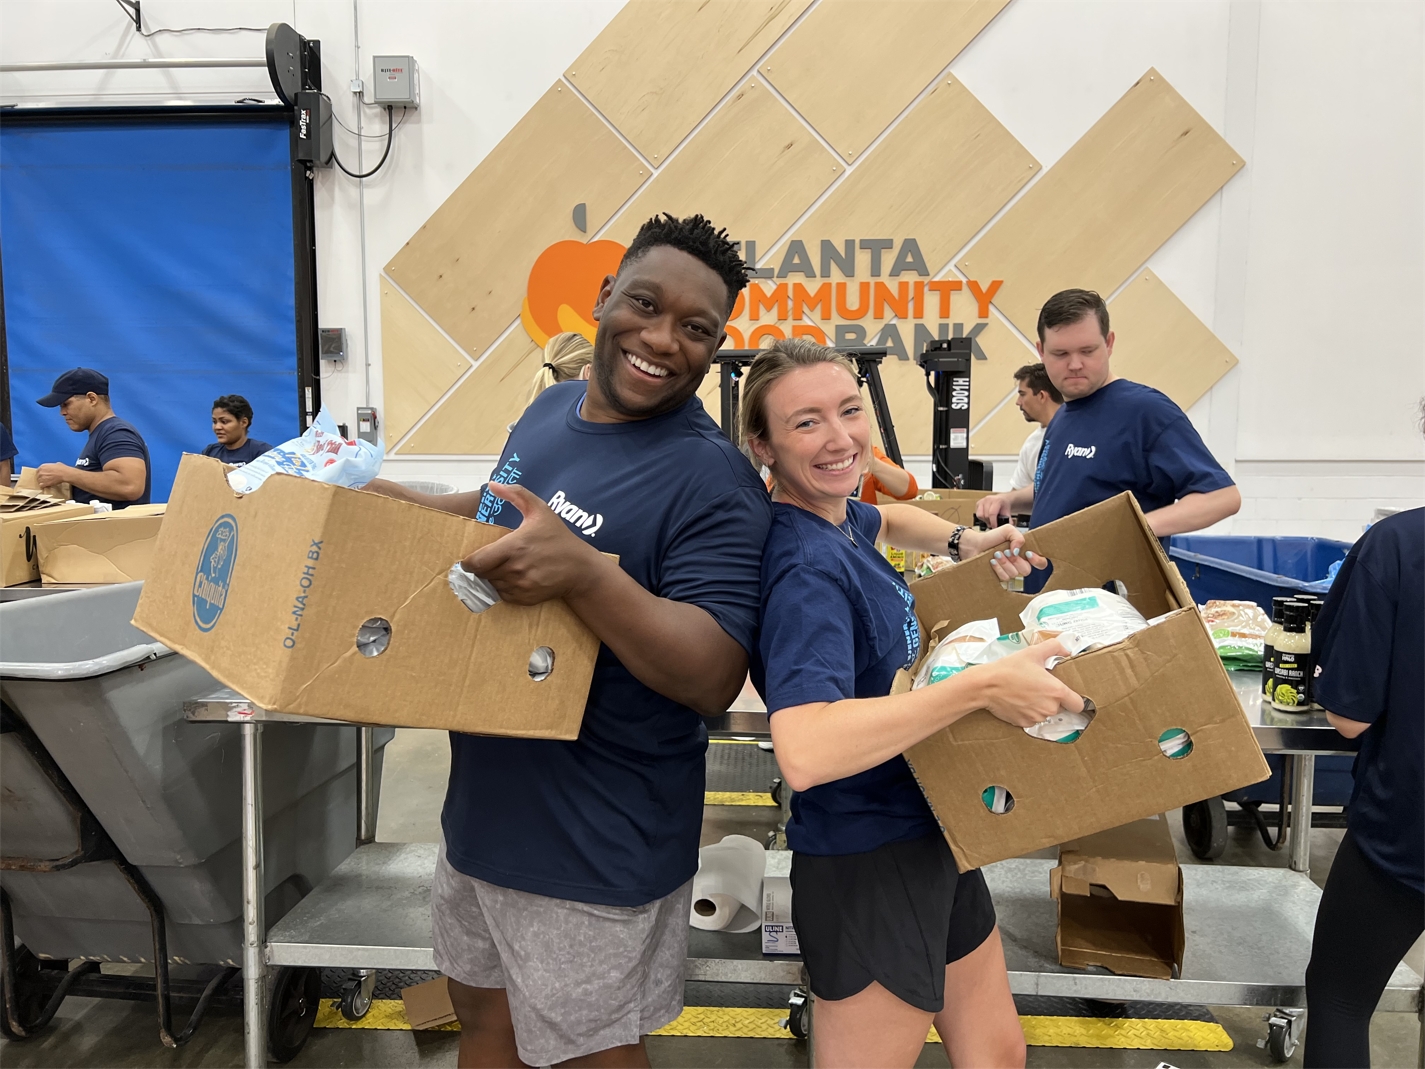 Our Atlanta team members hosted a food drive for the Winter Special Olympics and volunteered together at the Atlanta Community Food Bank.